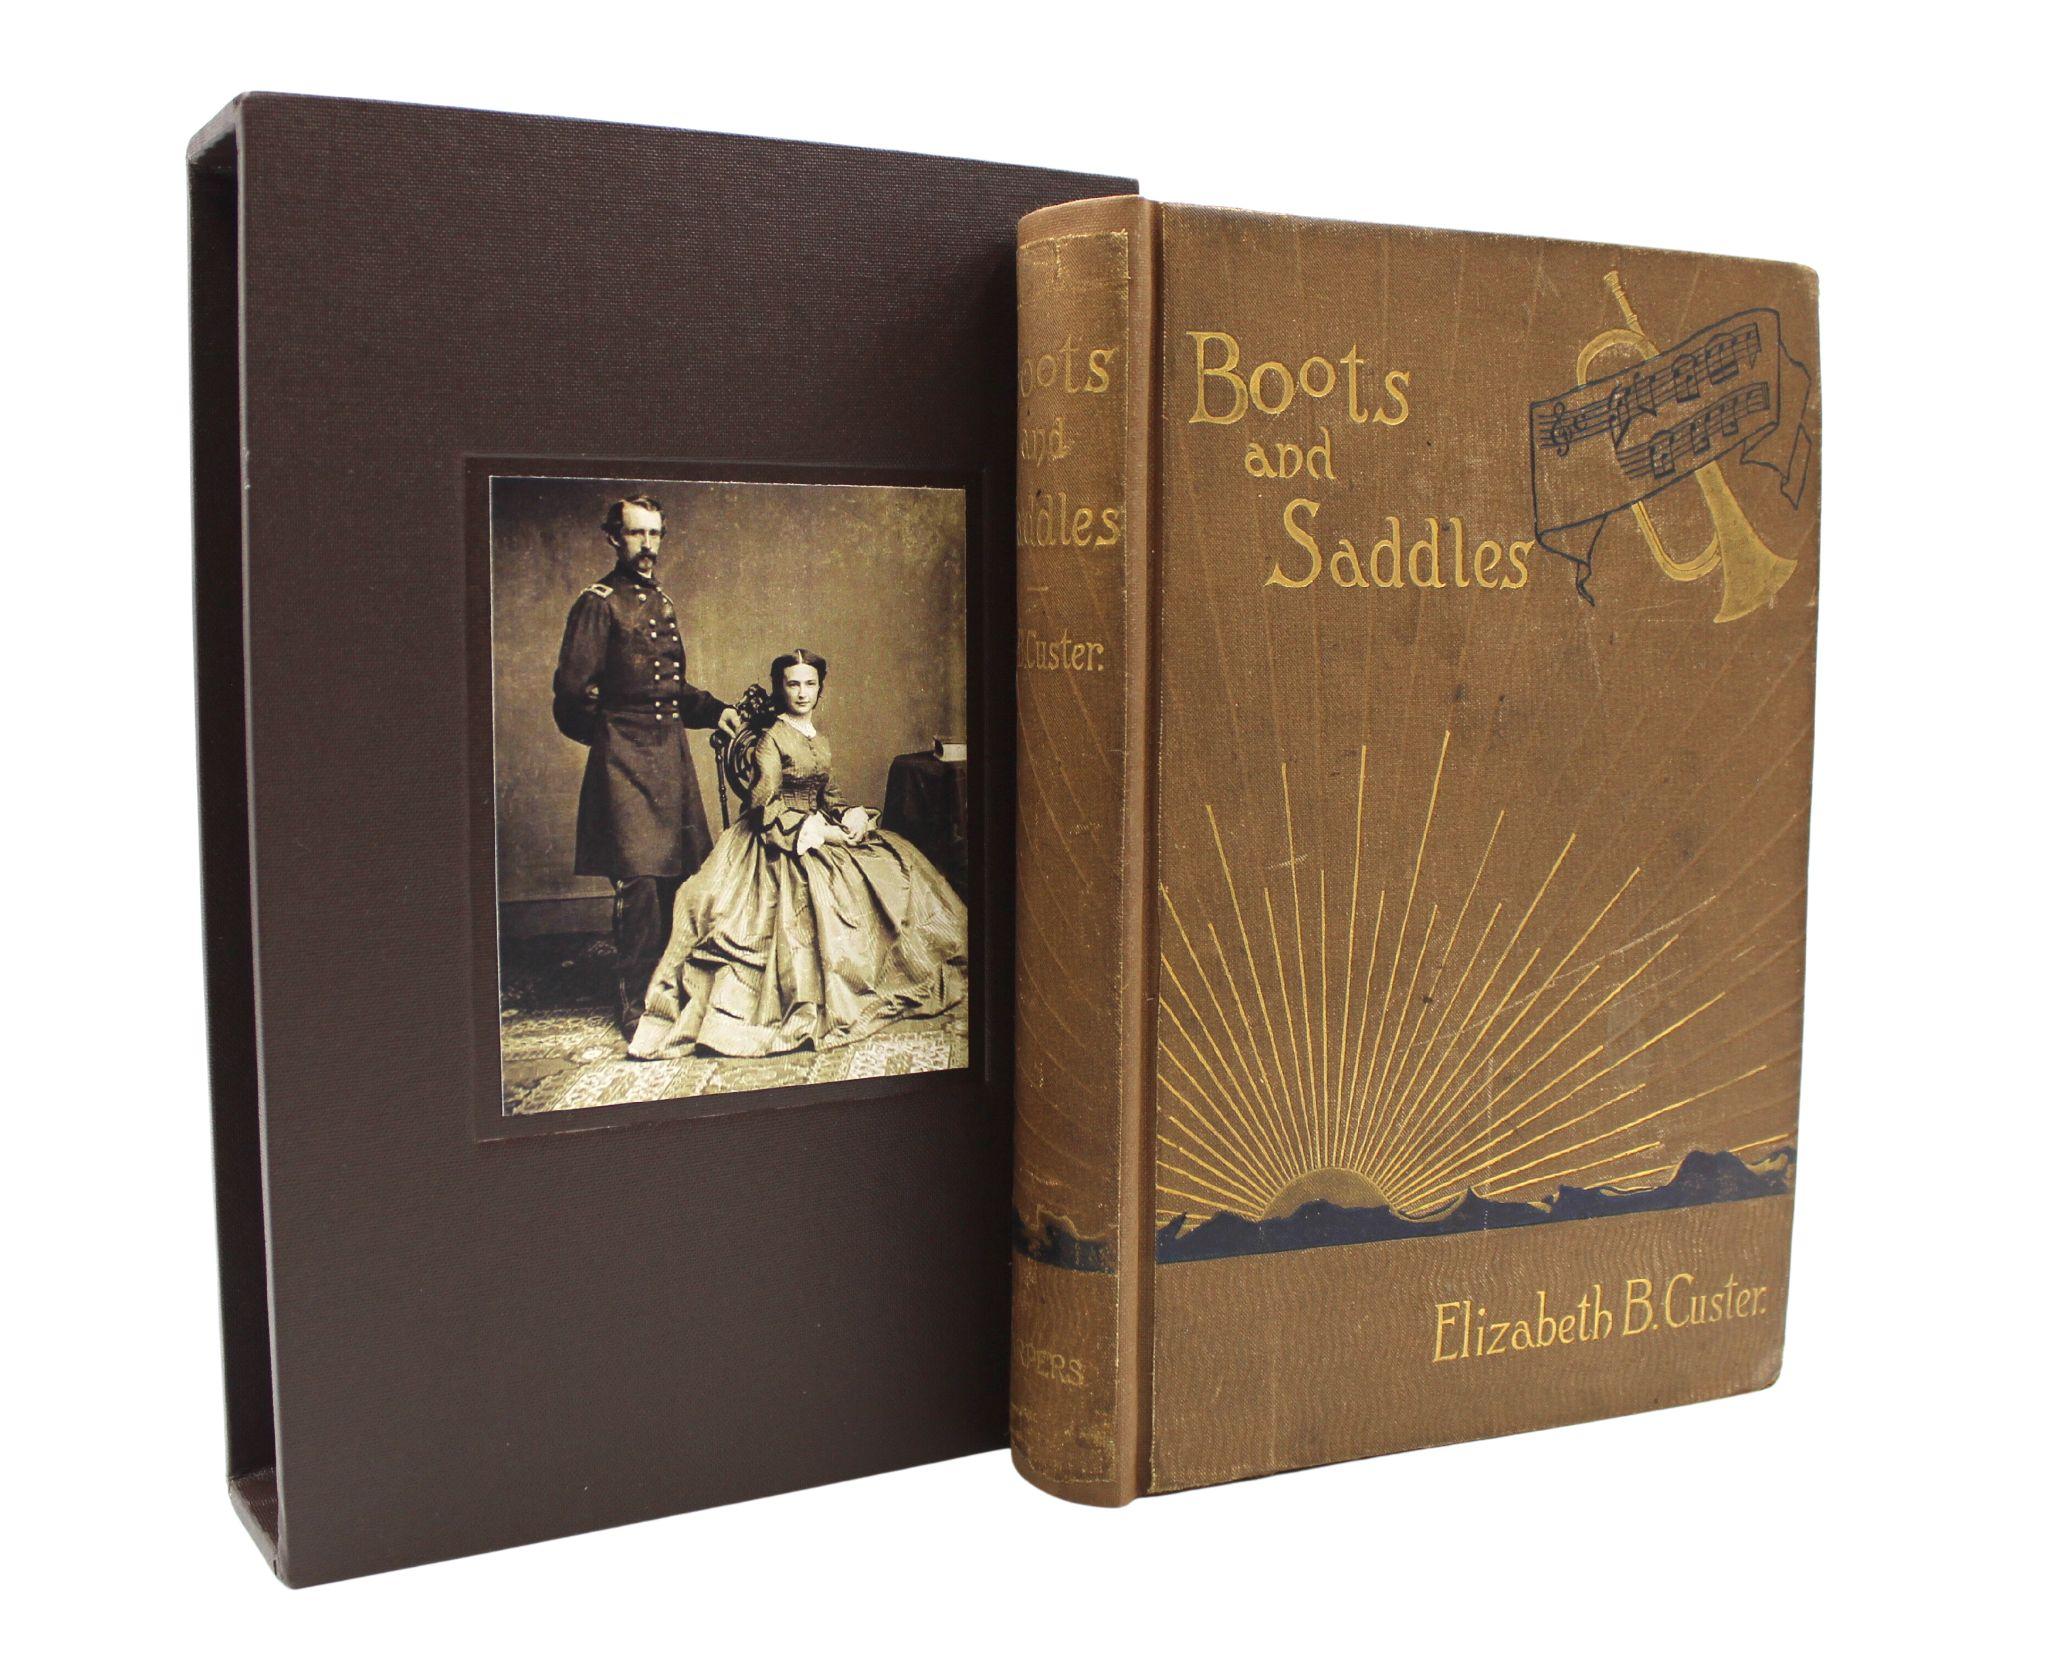 American Boots and Saddles by Elizabeth B. Custer, First Edition, 1885 For Sale